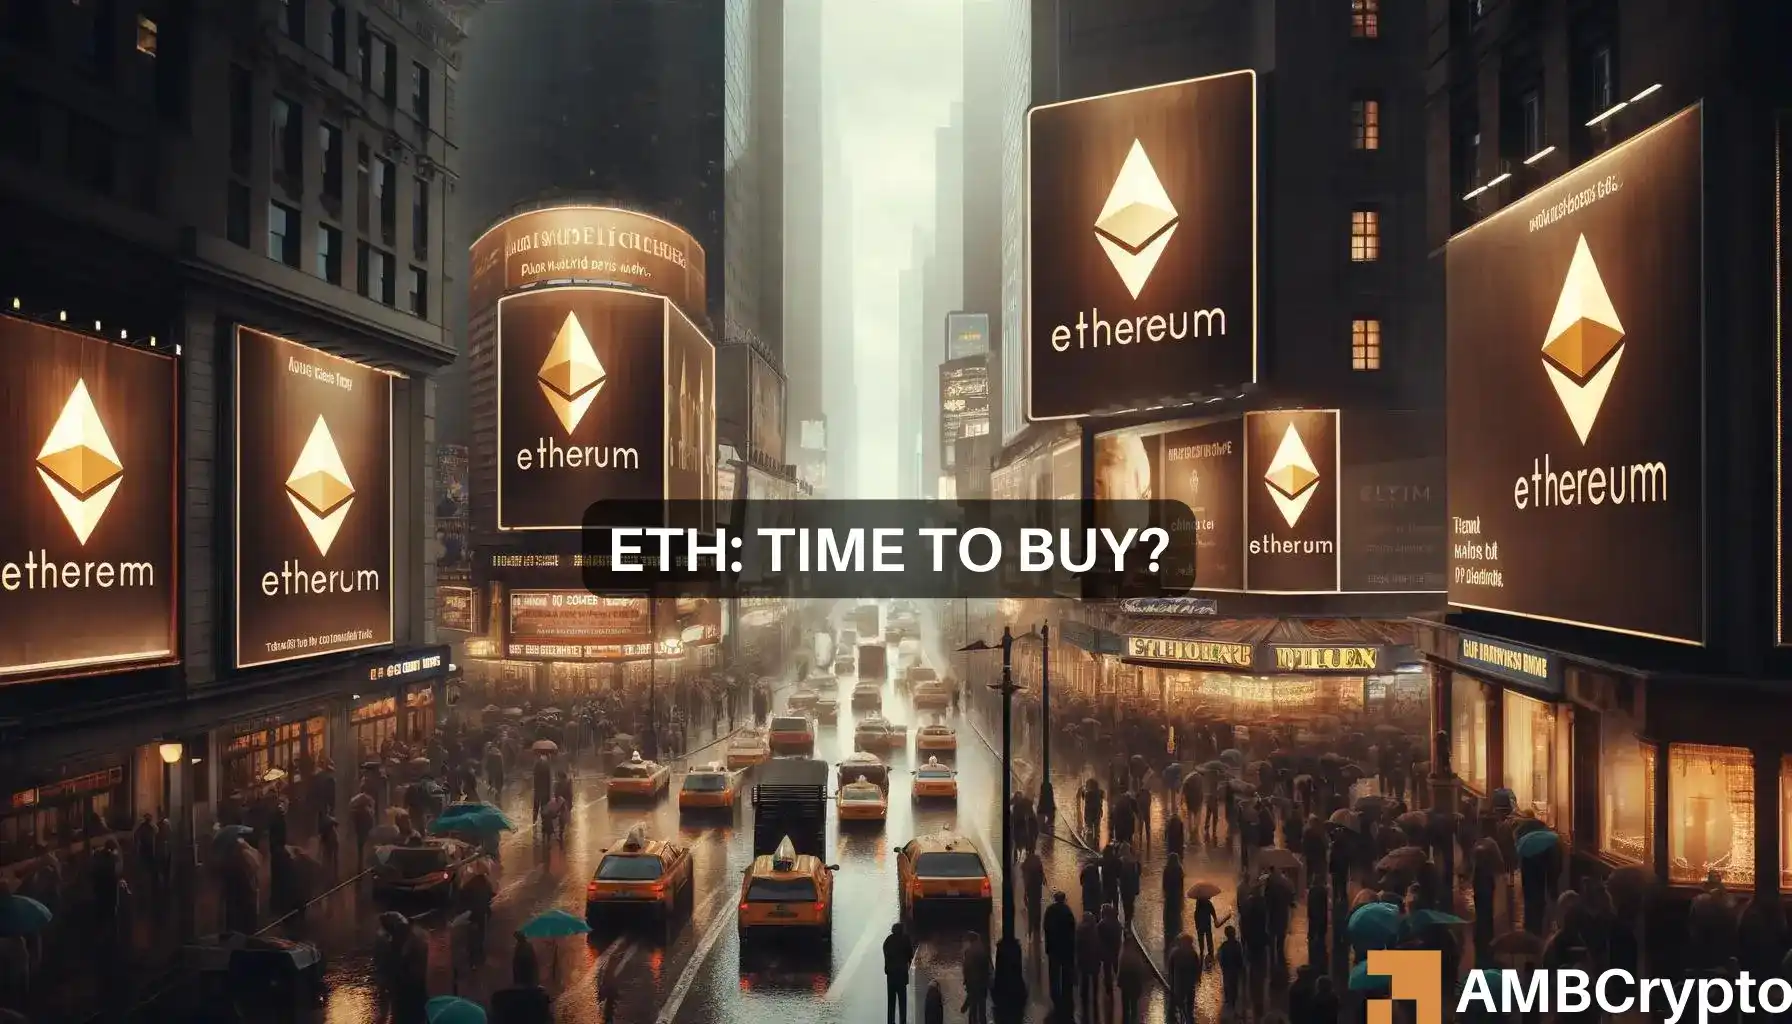 Ethereum – A buy opportunity ahead of Bitcoin’s halving could emerge IF…